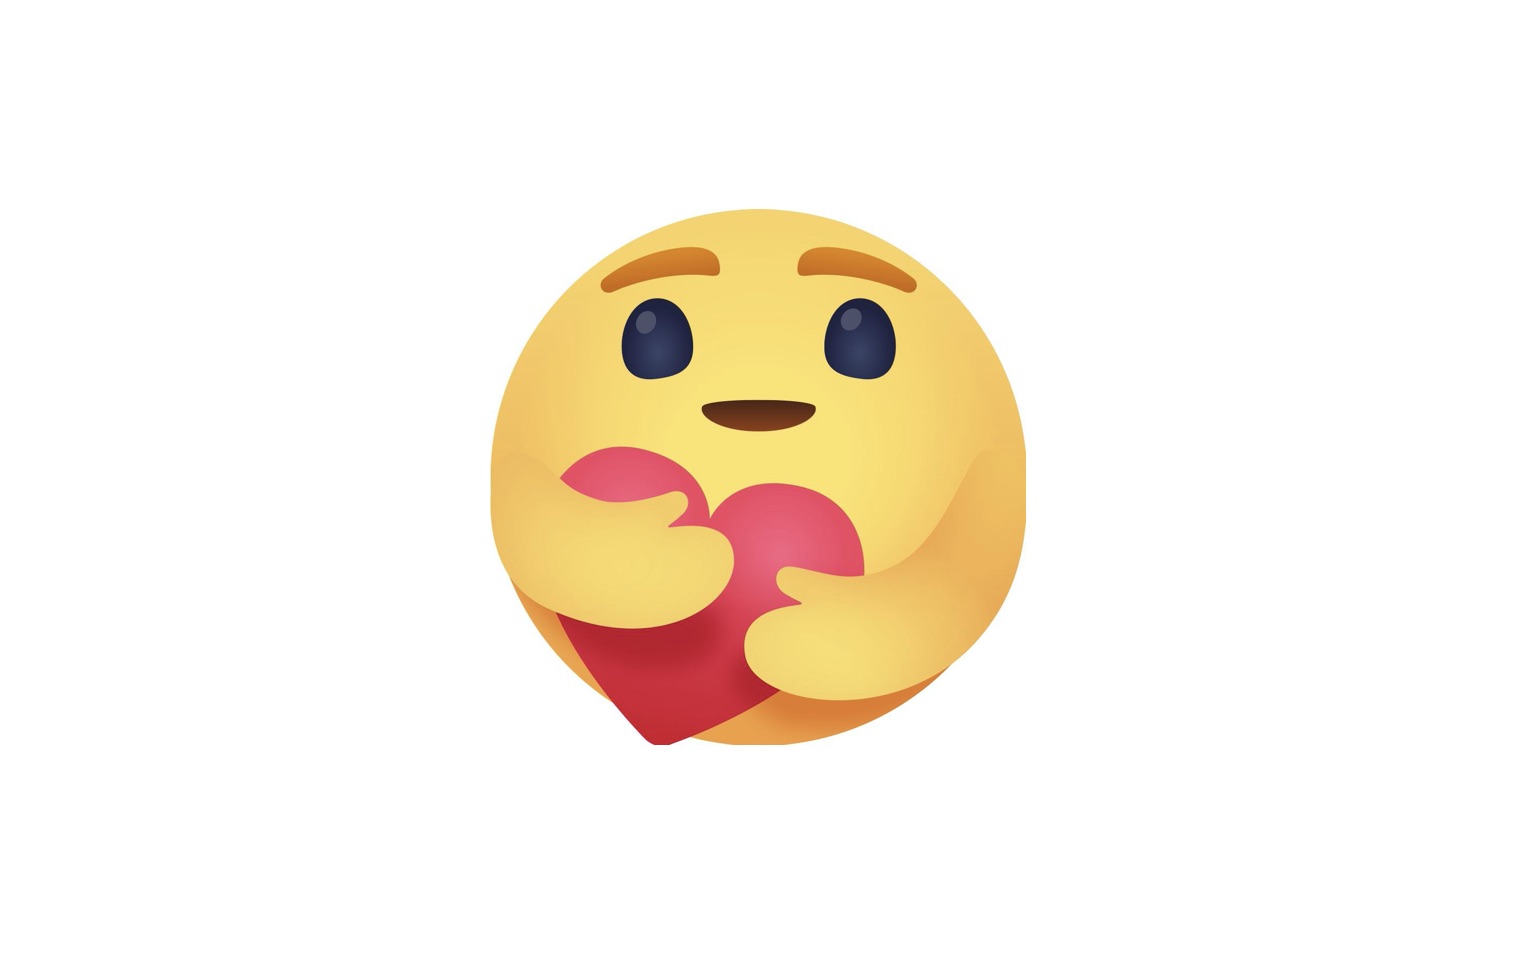 Emojipedia on Twitter: "Facebook's new Care reaction is ...